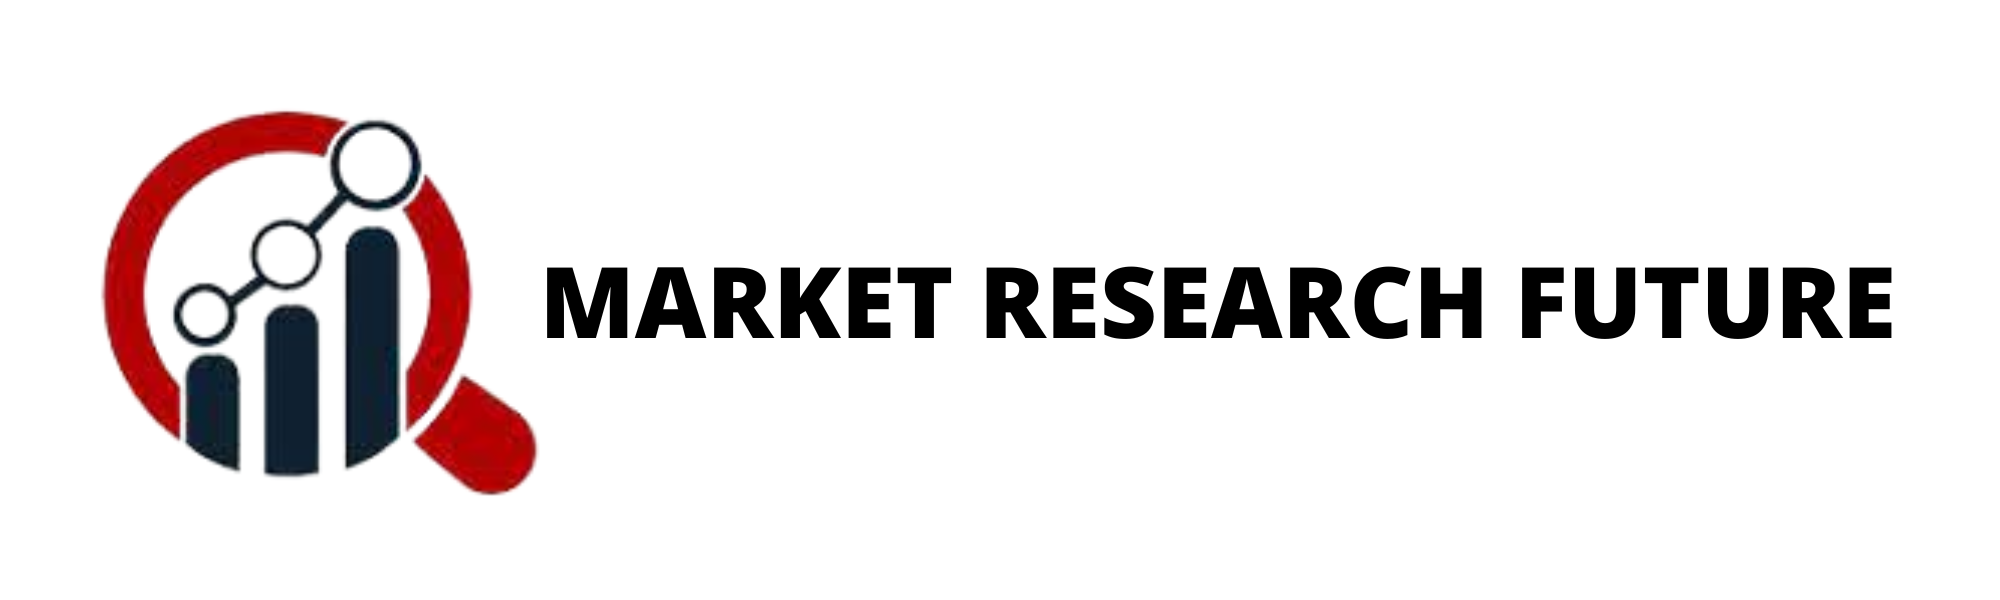 Electrostatic Discharge Packaging Market Size, Future Advancements,...